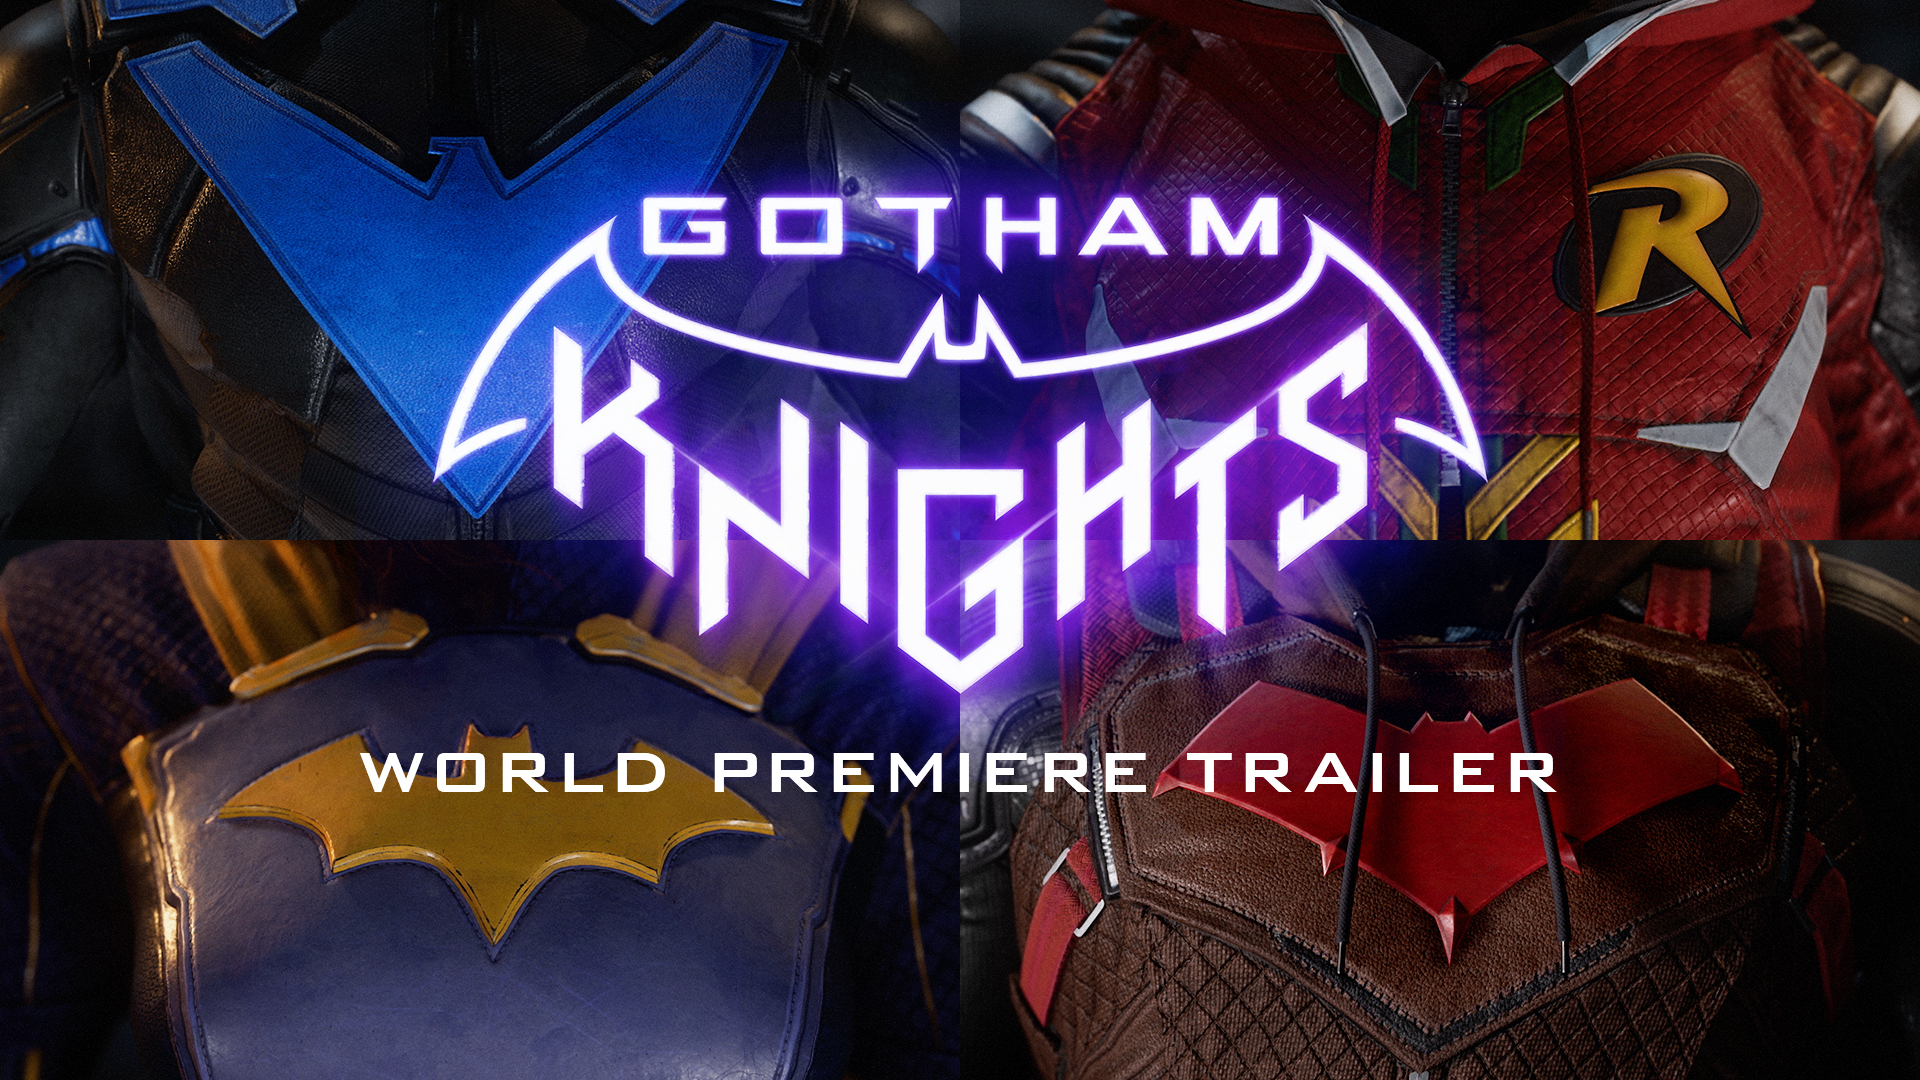 Gotham Knights Announced for PS4, PS5, Xbox One, Xbox Series X, PC; Coming 2021